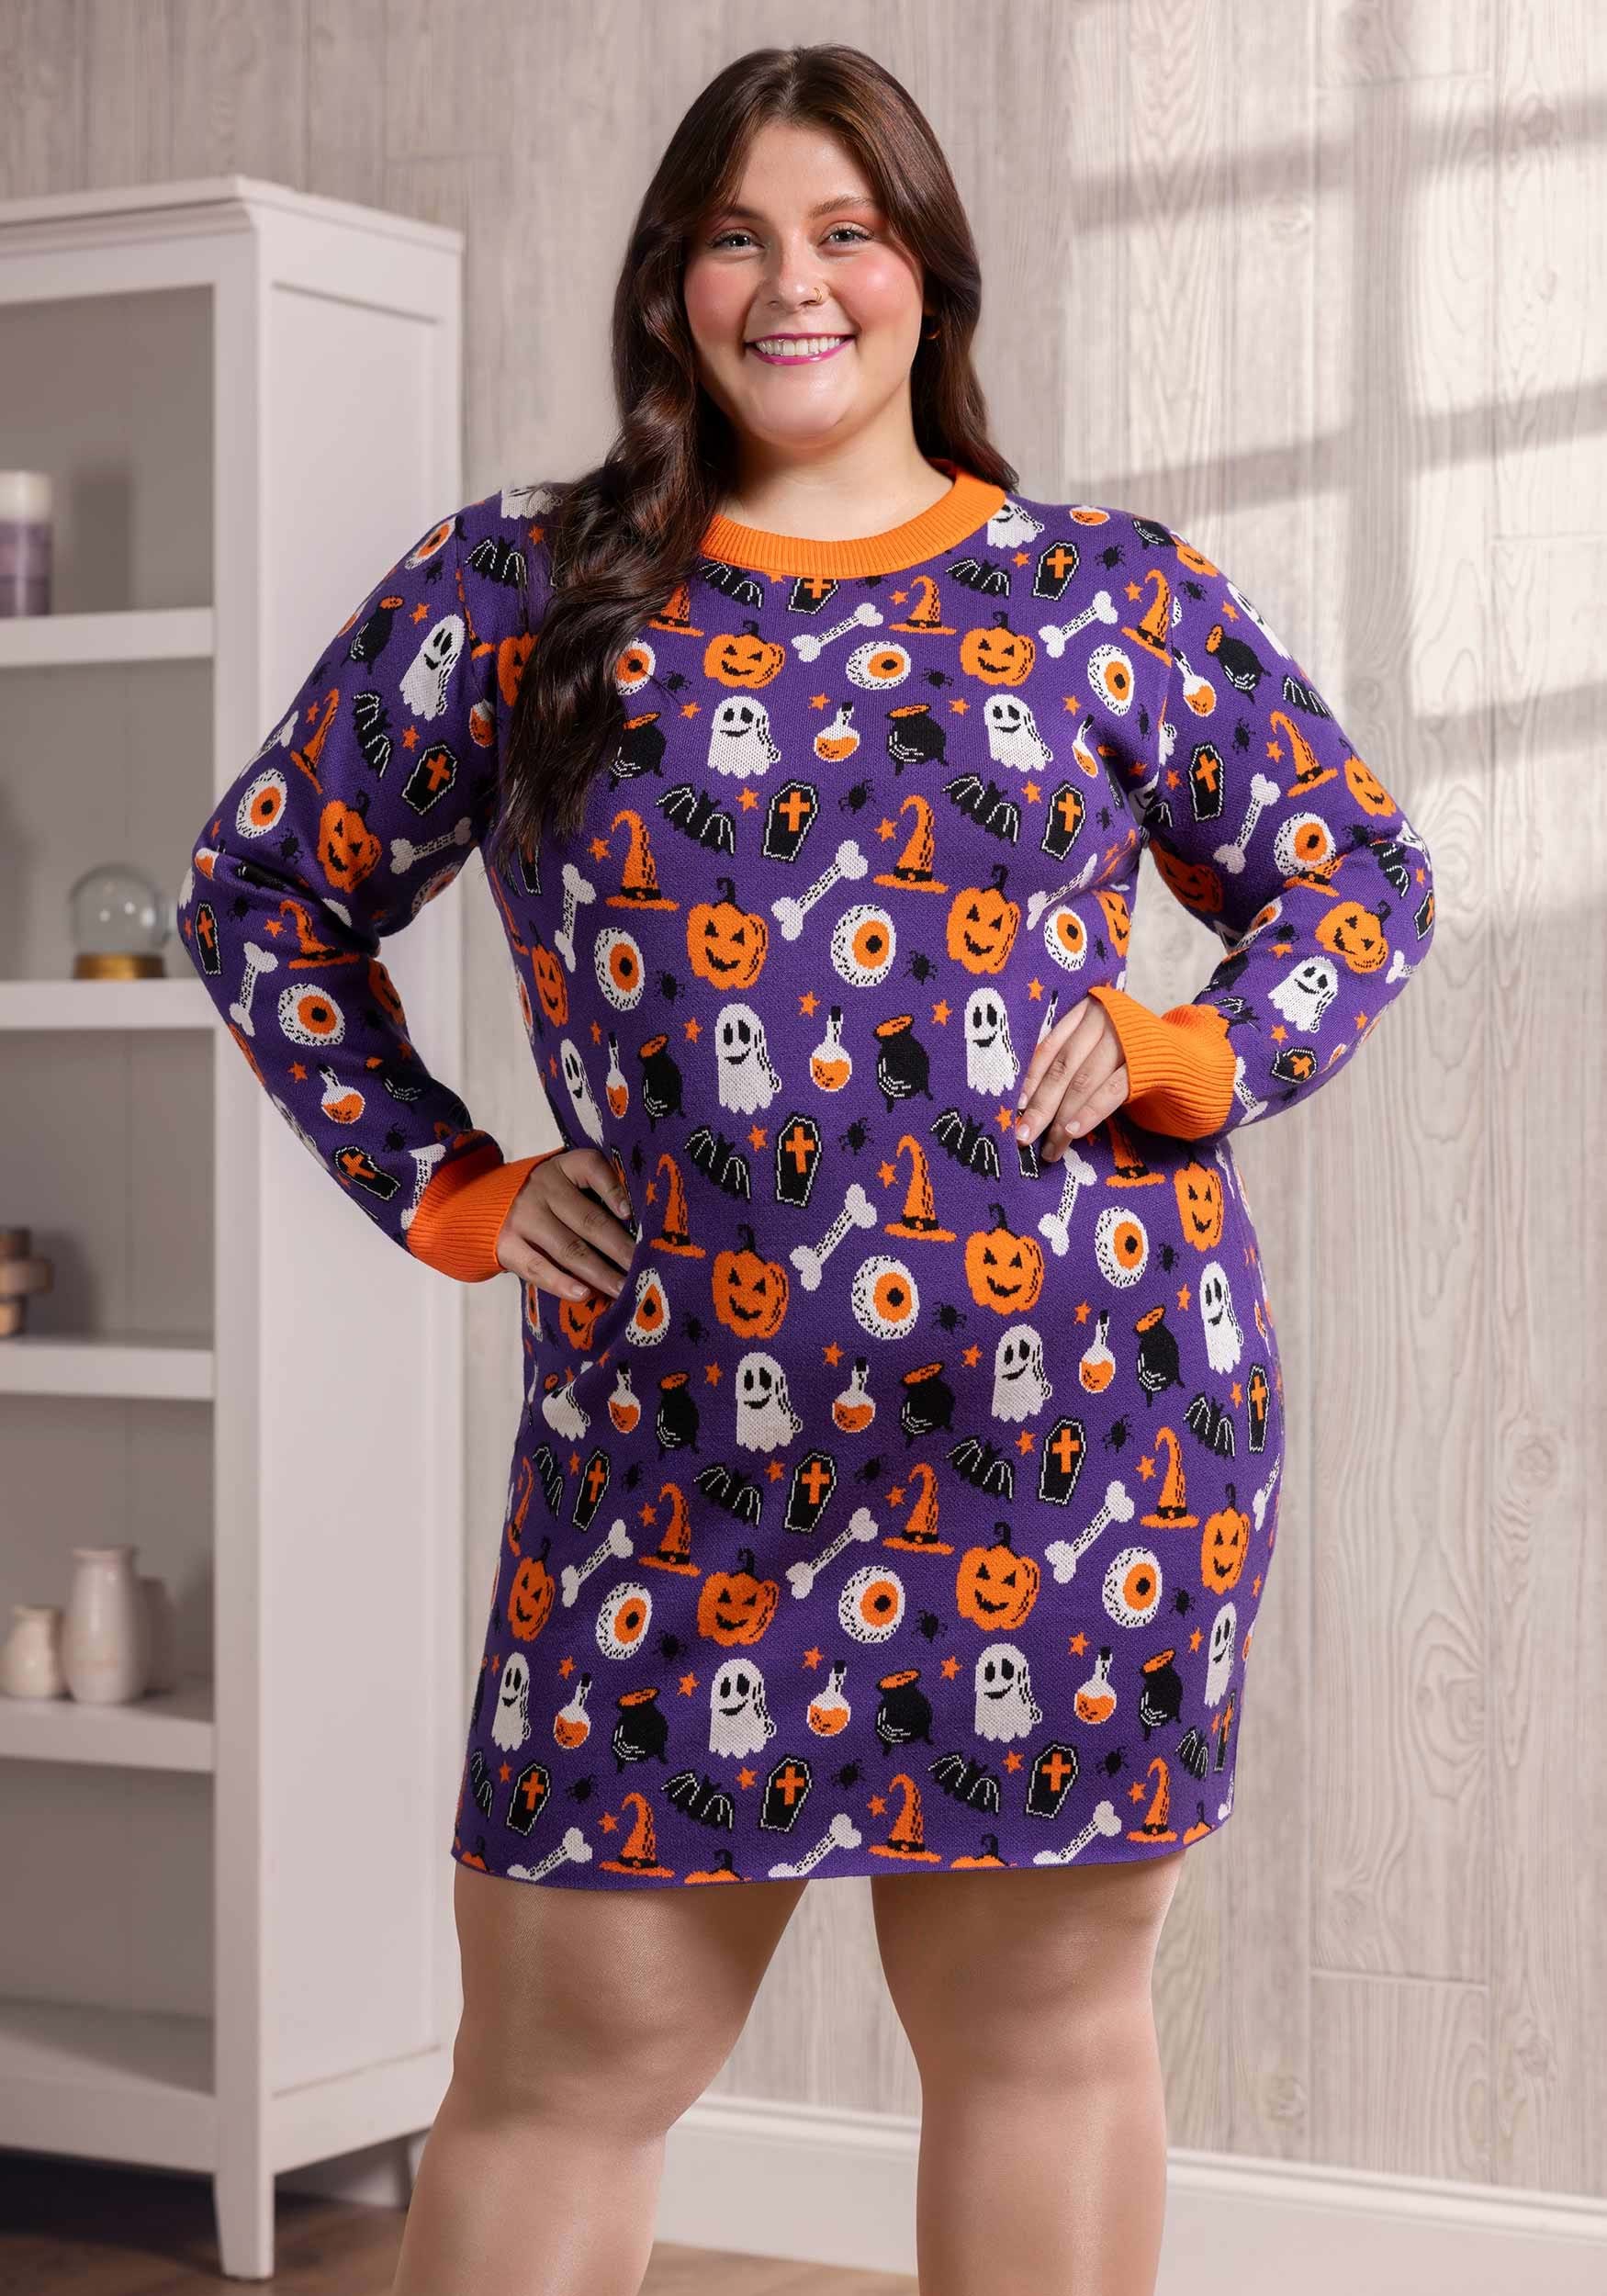 Spooky Smiles Halloween Adult Sweater Dress , Made By Us Exclusive